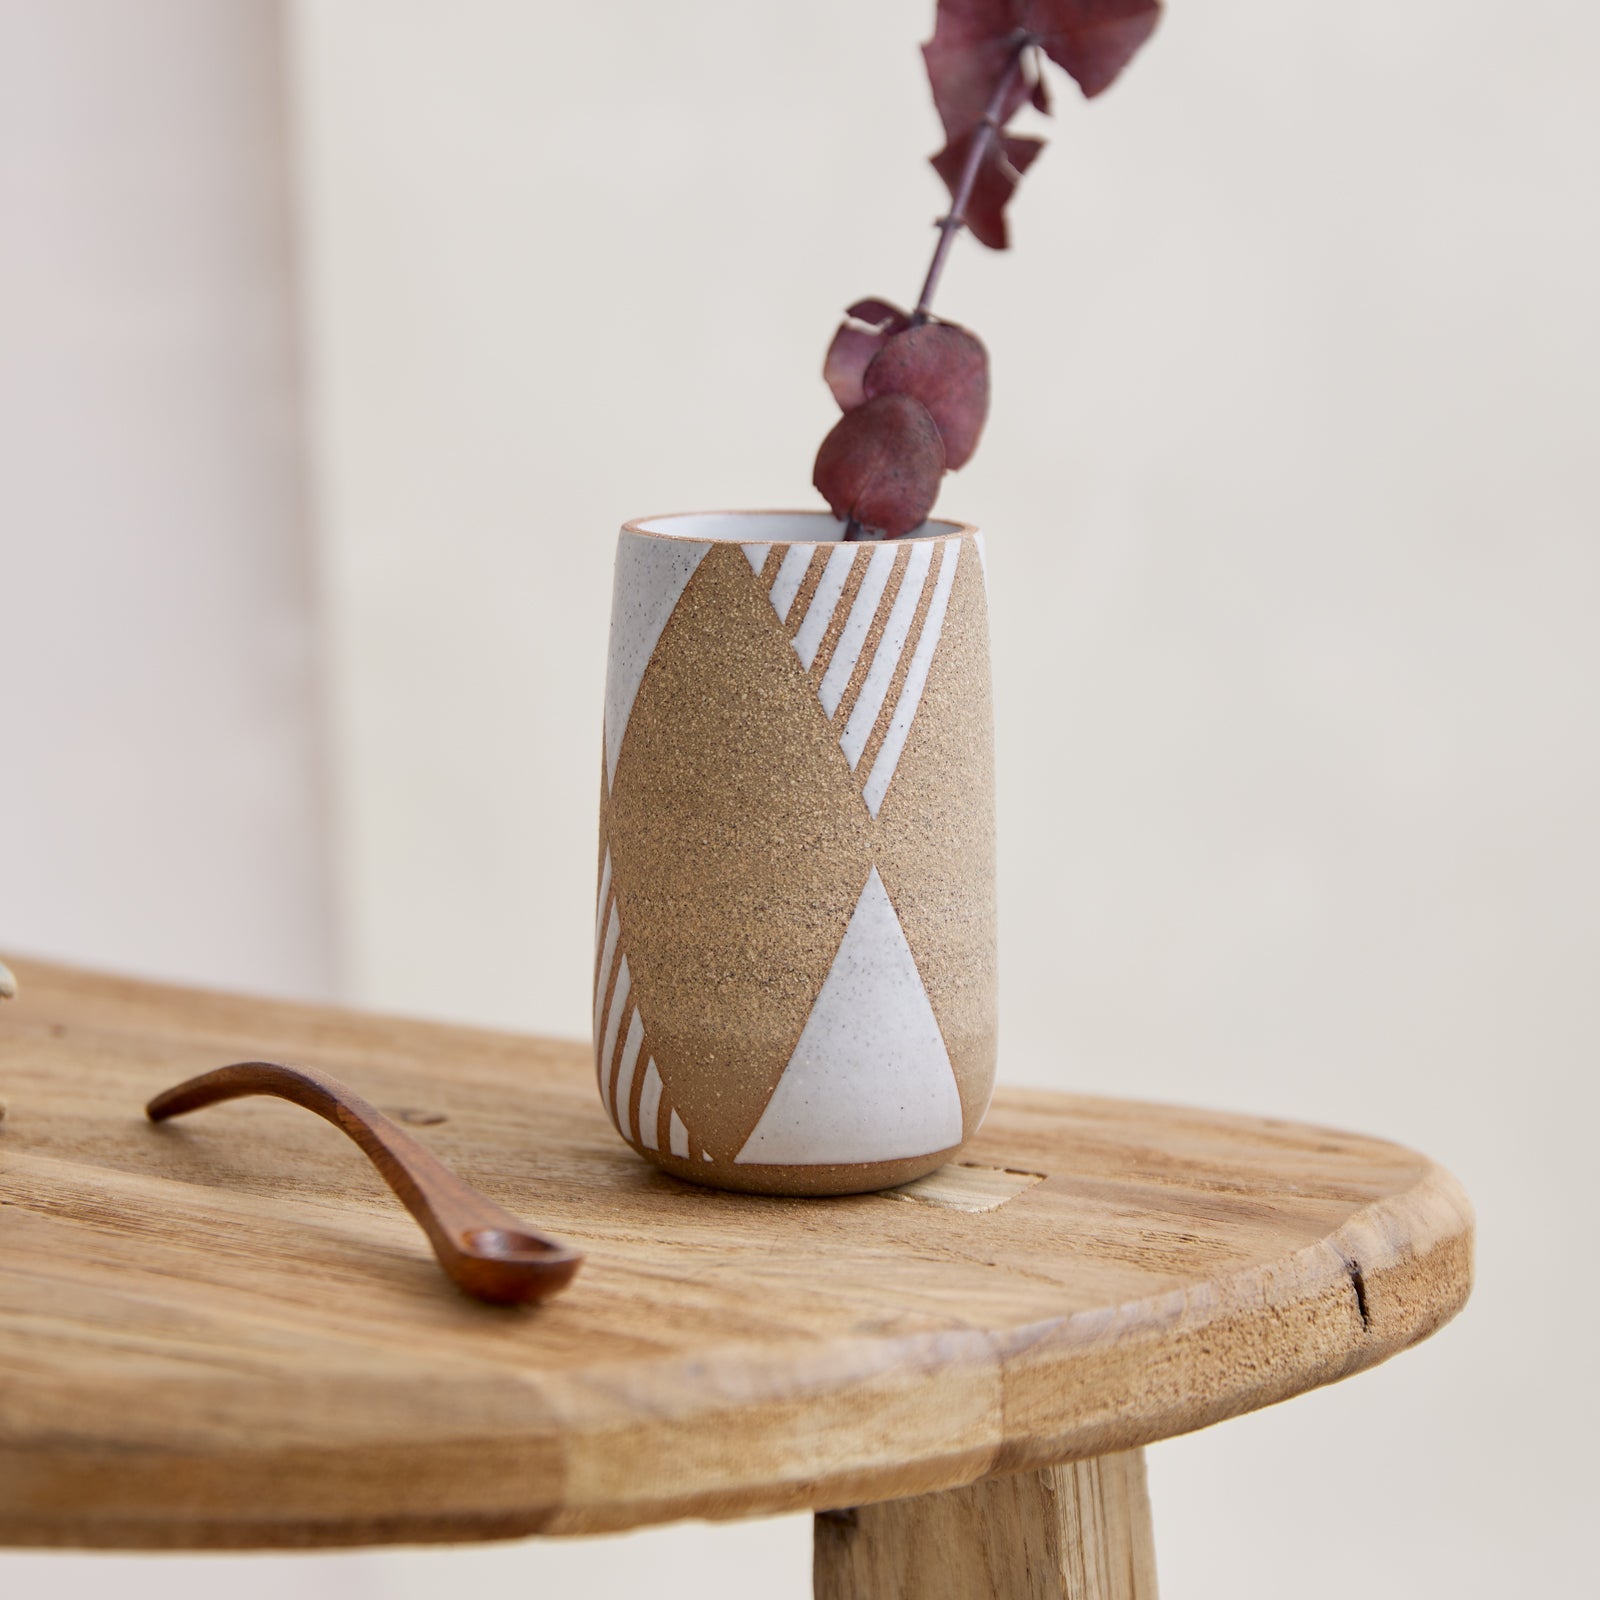  A front view of the Geometric Handmade Ceramic Mini Vase in natural and white glaze. The handmade vase has a geometric design and a tapered opening. The ceramic vase sits on a wooden side table holding flowers in a coastal-styled setting.